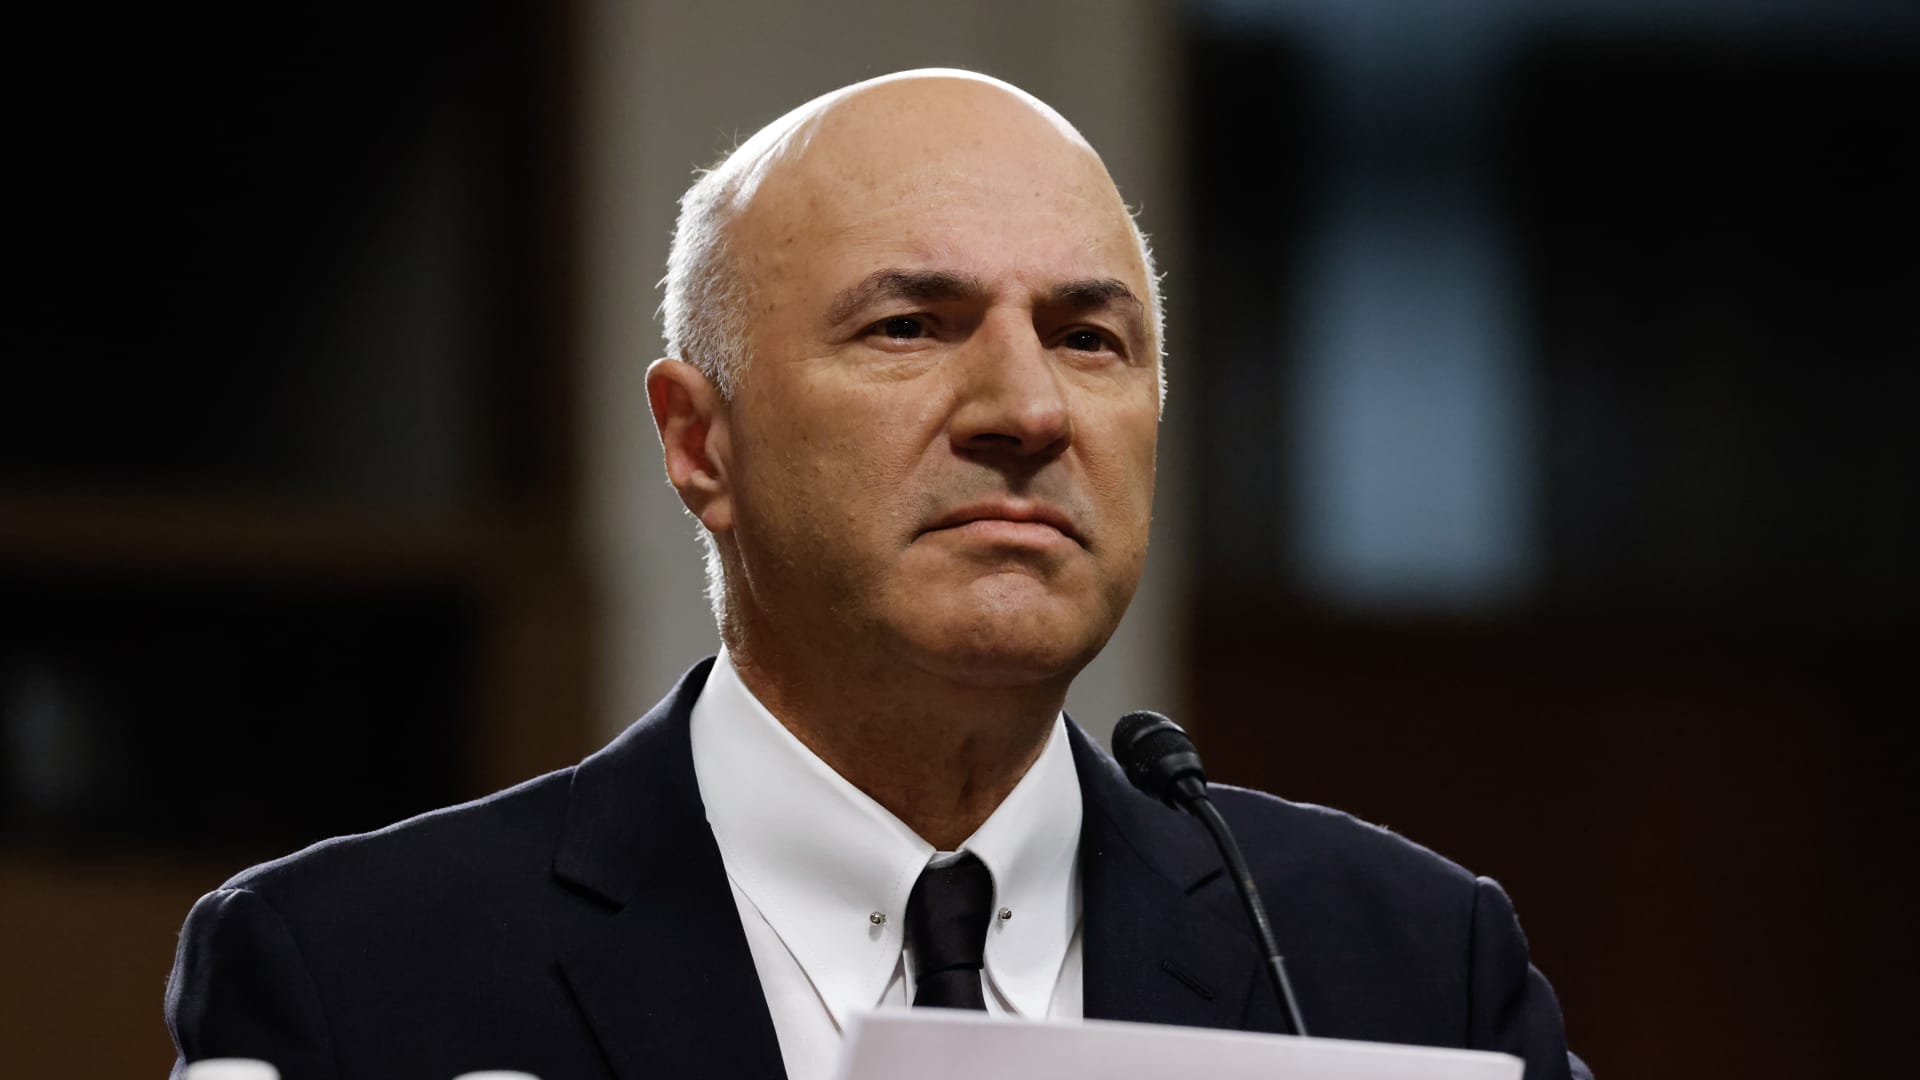 Former FTX spokesman Kevin O'Leary defends endorsement of crypto firm